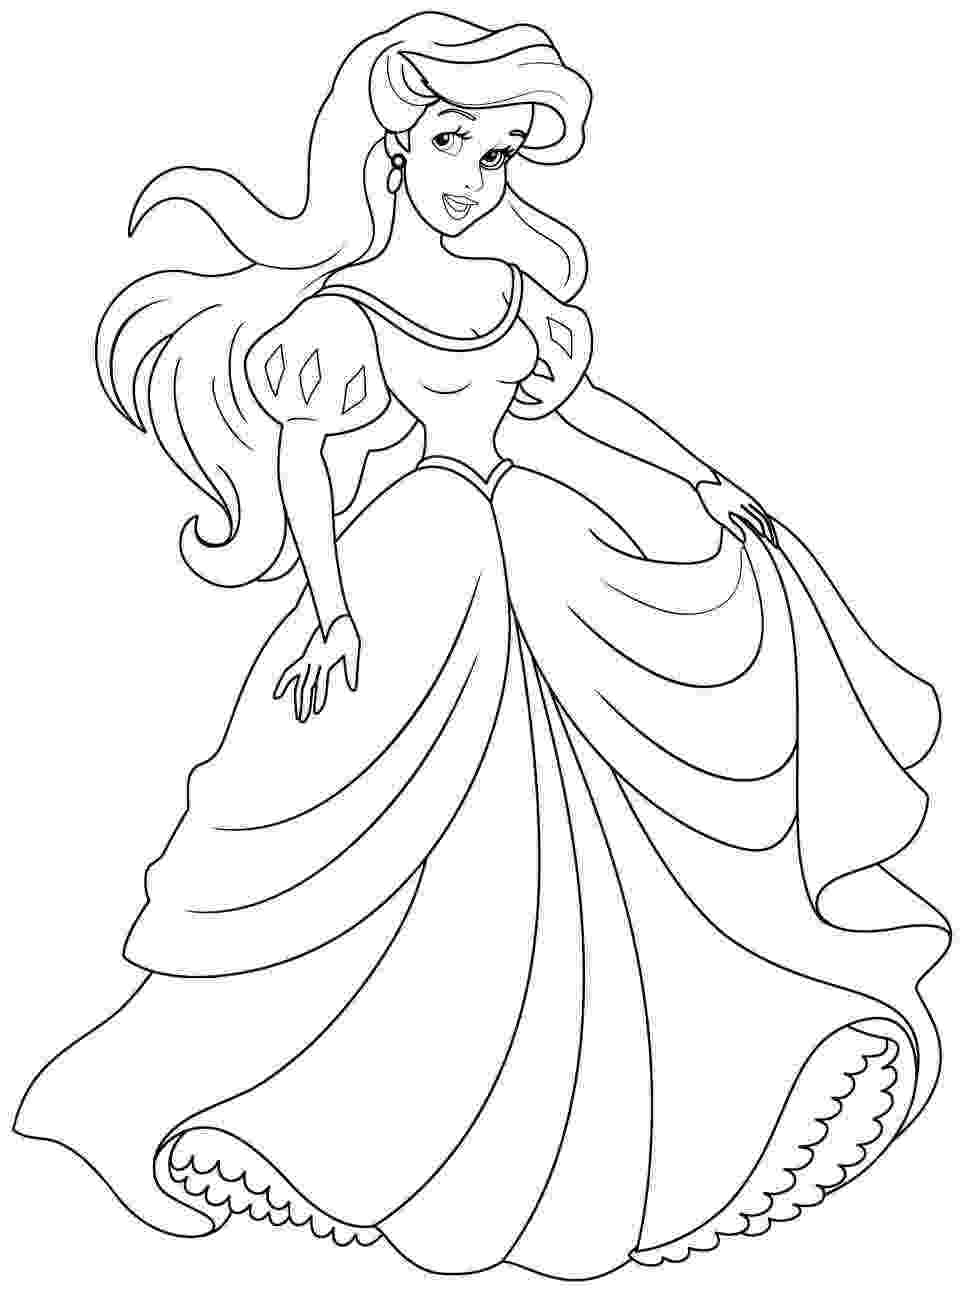 printable ariel coloring pages ariel coloring pages to download and print for free ariel coloring pages printable 1 1